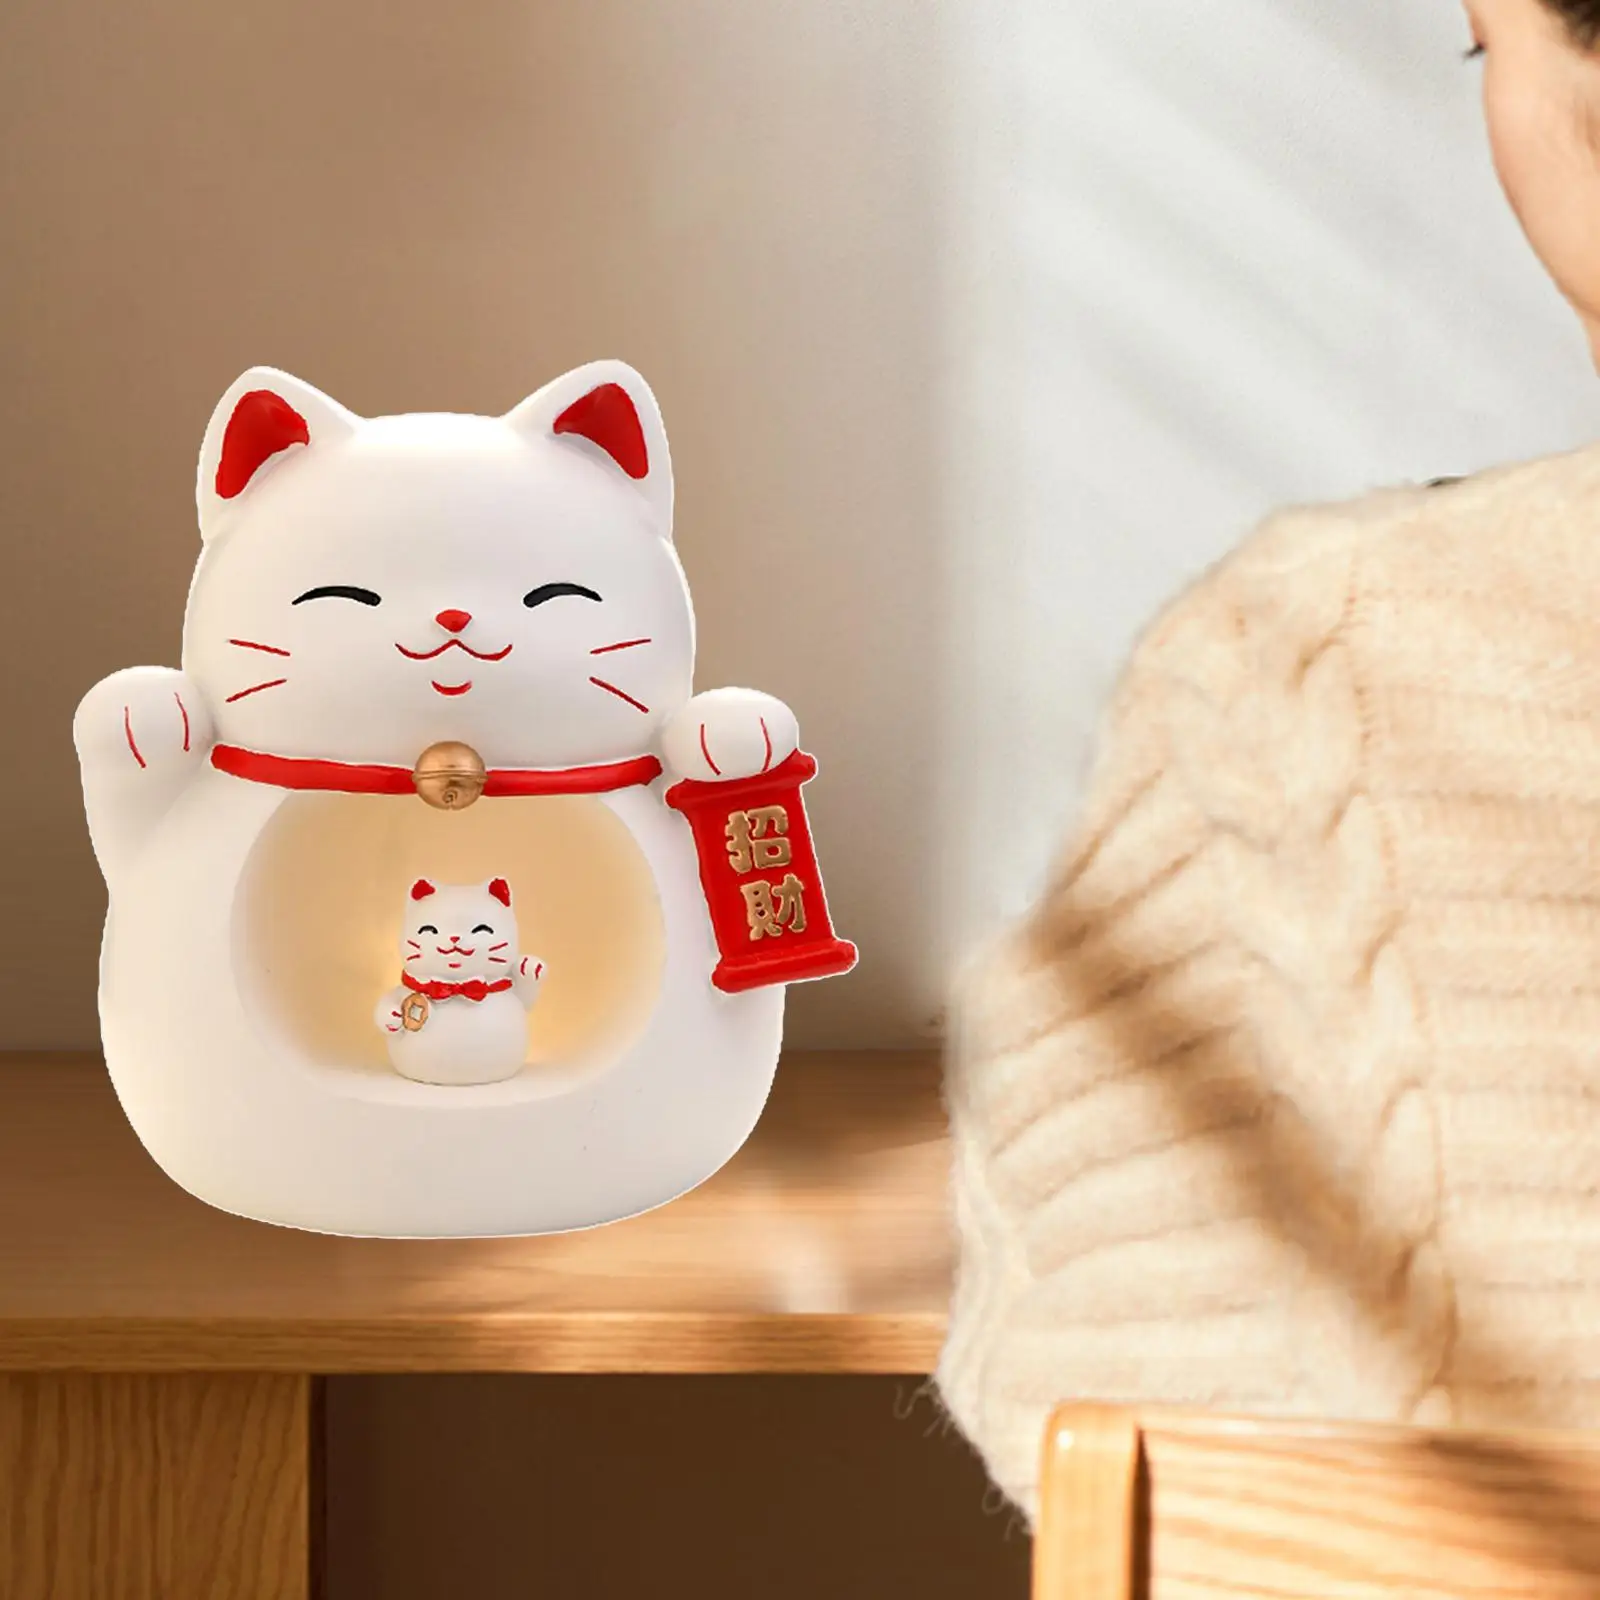 Statue Figurine Lucky Cats with Light Sculpture Animal Decor for Home Car Office Living Room Study Decor Ornament Resin Crafts